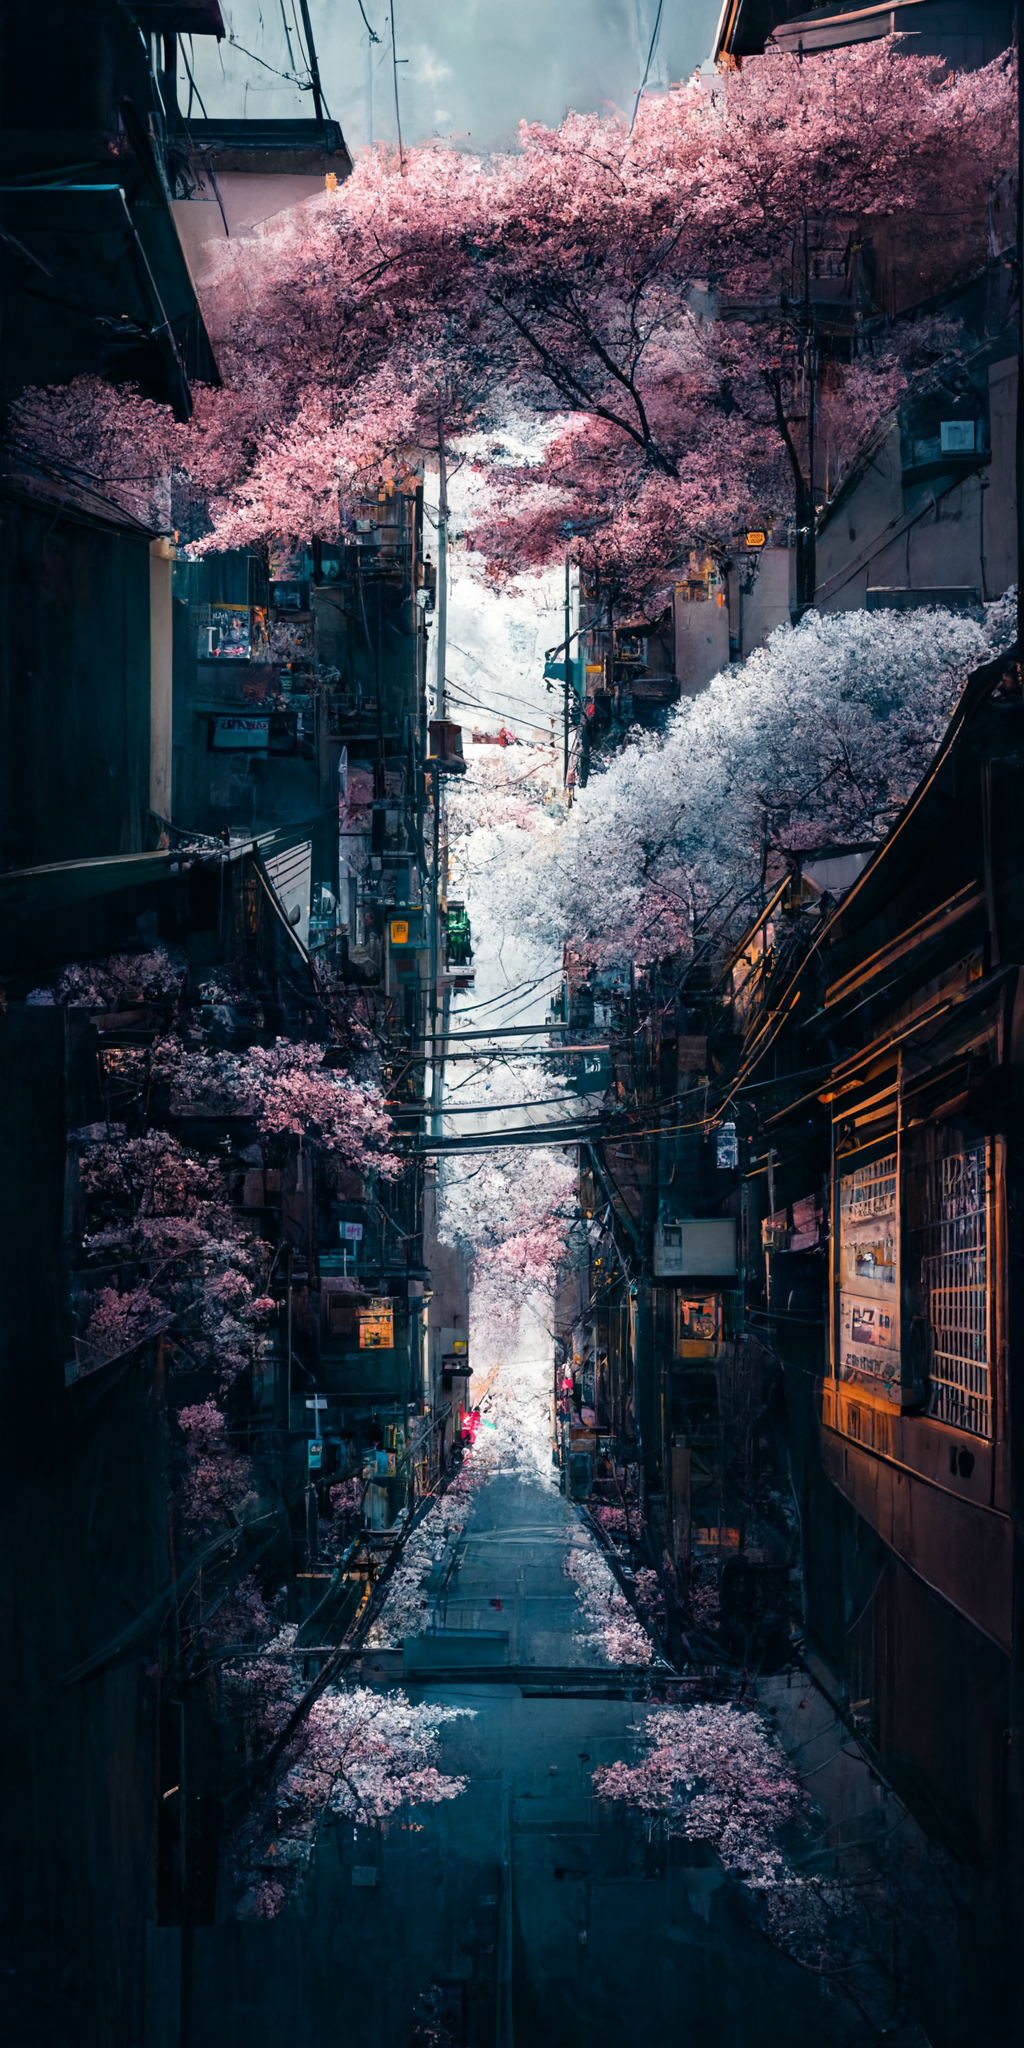 Bluewing_an_alley_in_Tokyo_with_cherry_blossoms_Sony_a7_III_Top_23412bb9-e22f-4c3c-906e-7c13cc49976b.jpeg